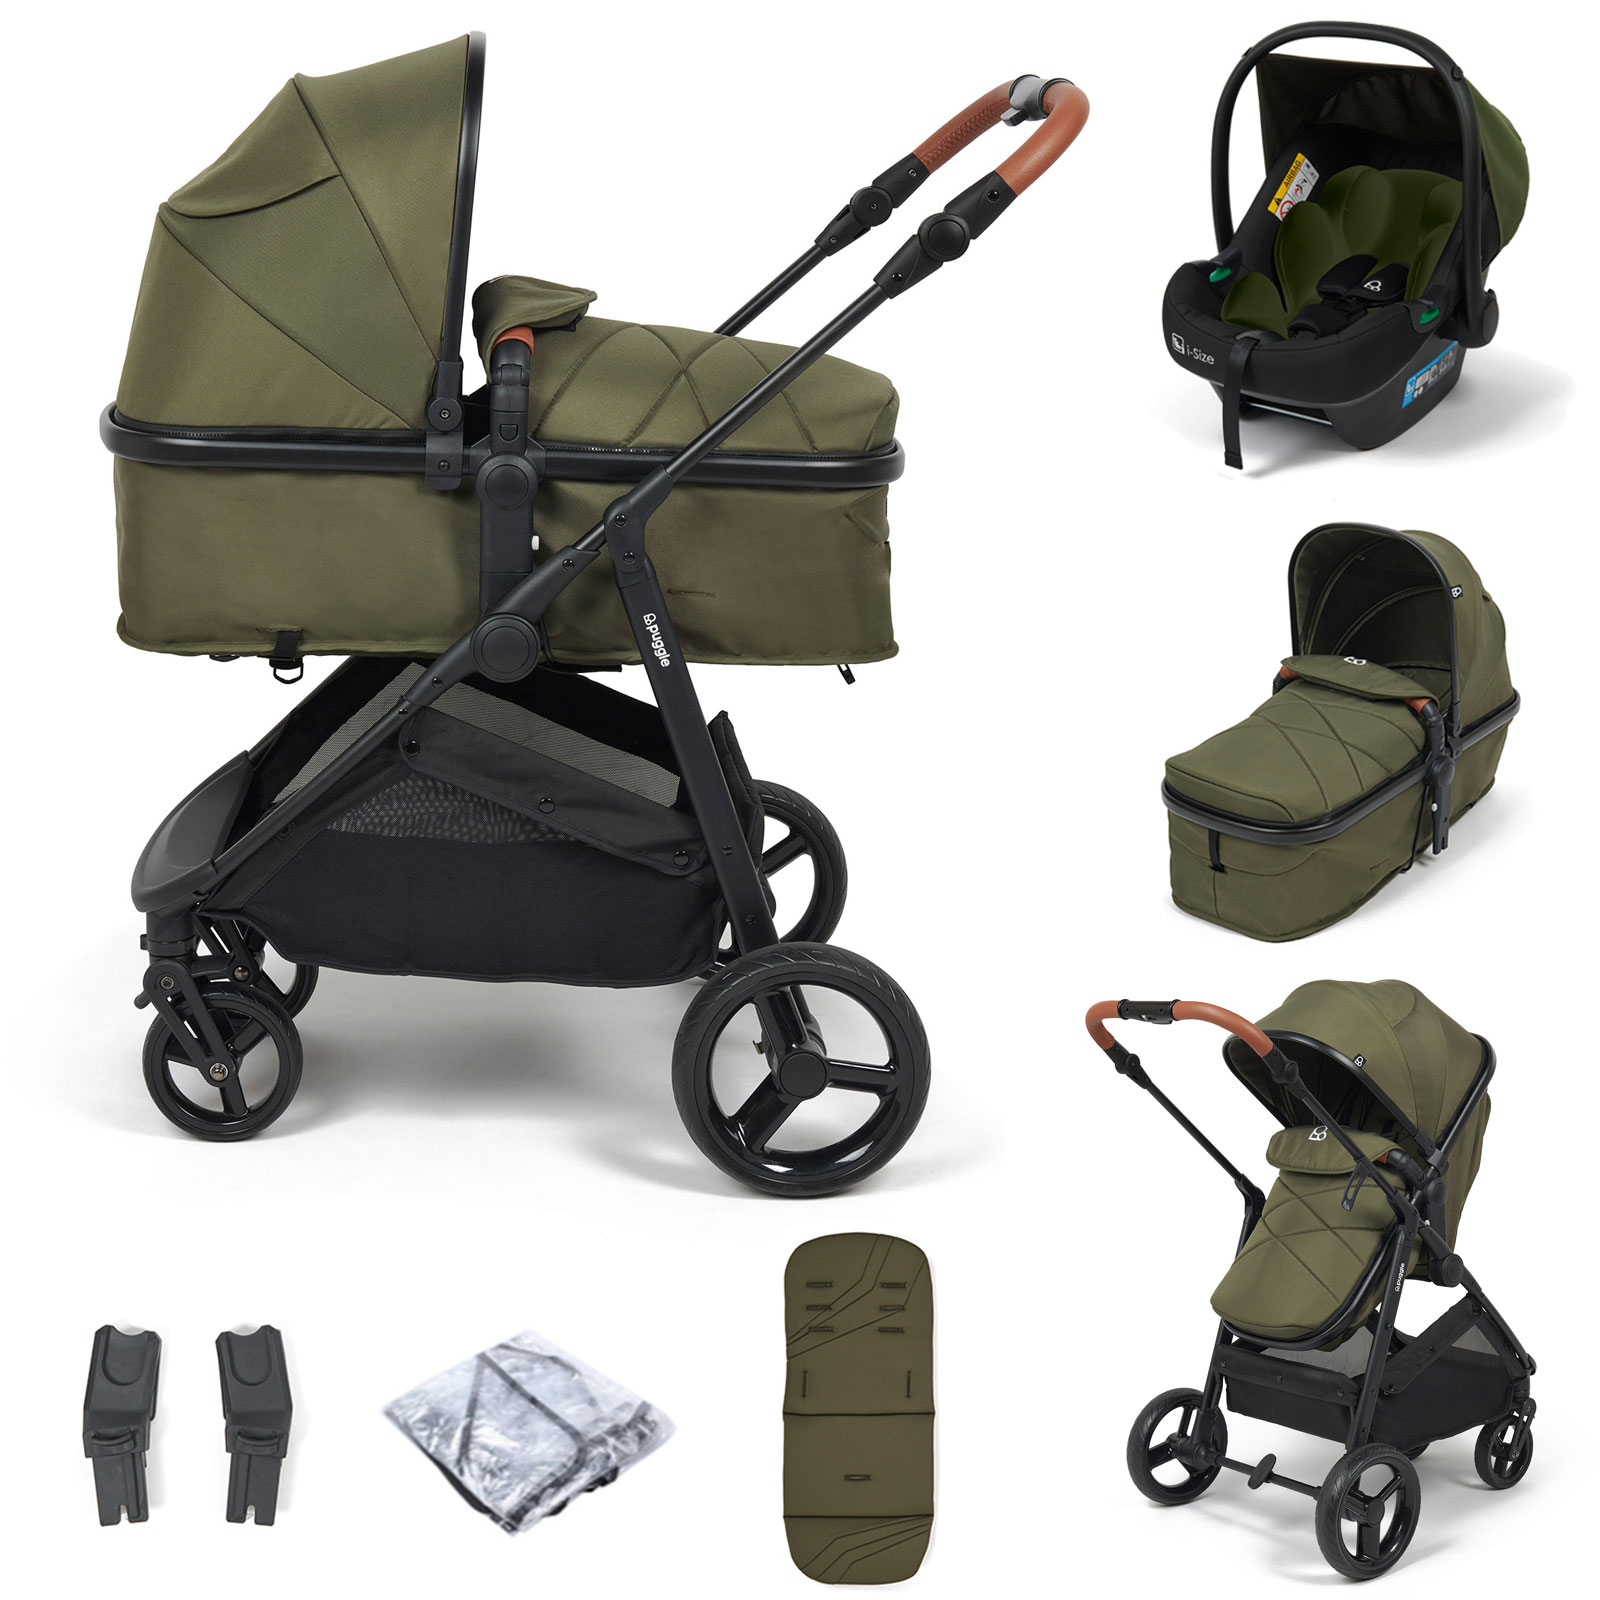 Puggle Monaco XT 2in1 Pushchair With Adjustable Handles i-Size Travel System - Forest Green